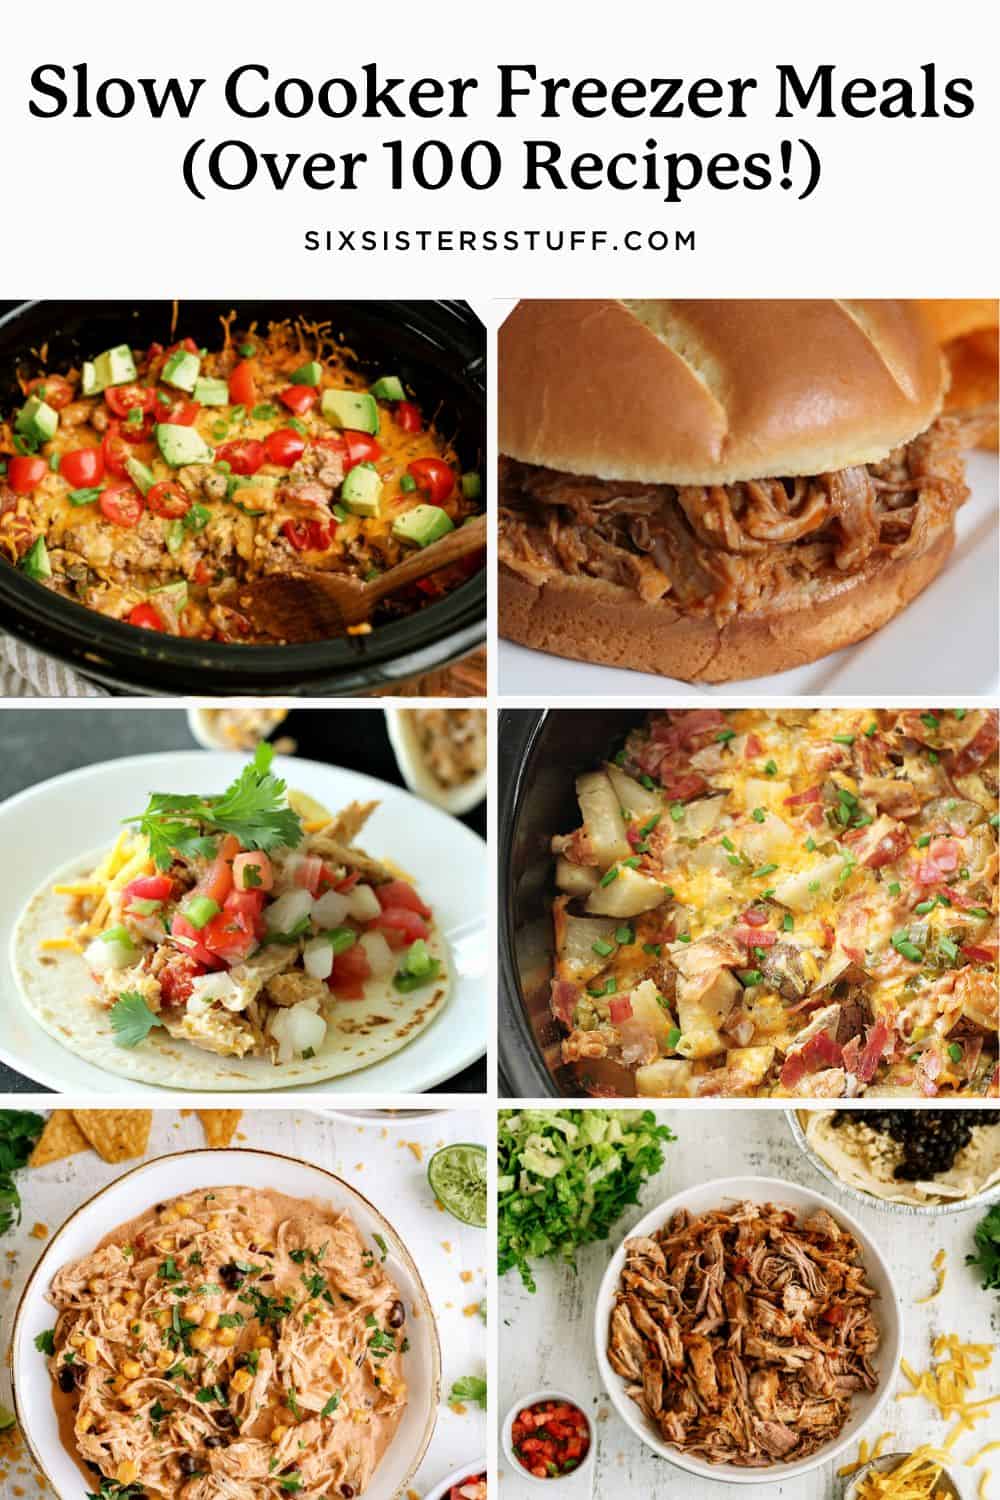 Best Crock Pot Recipes for Any Meal